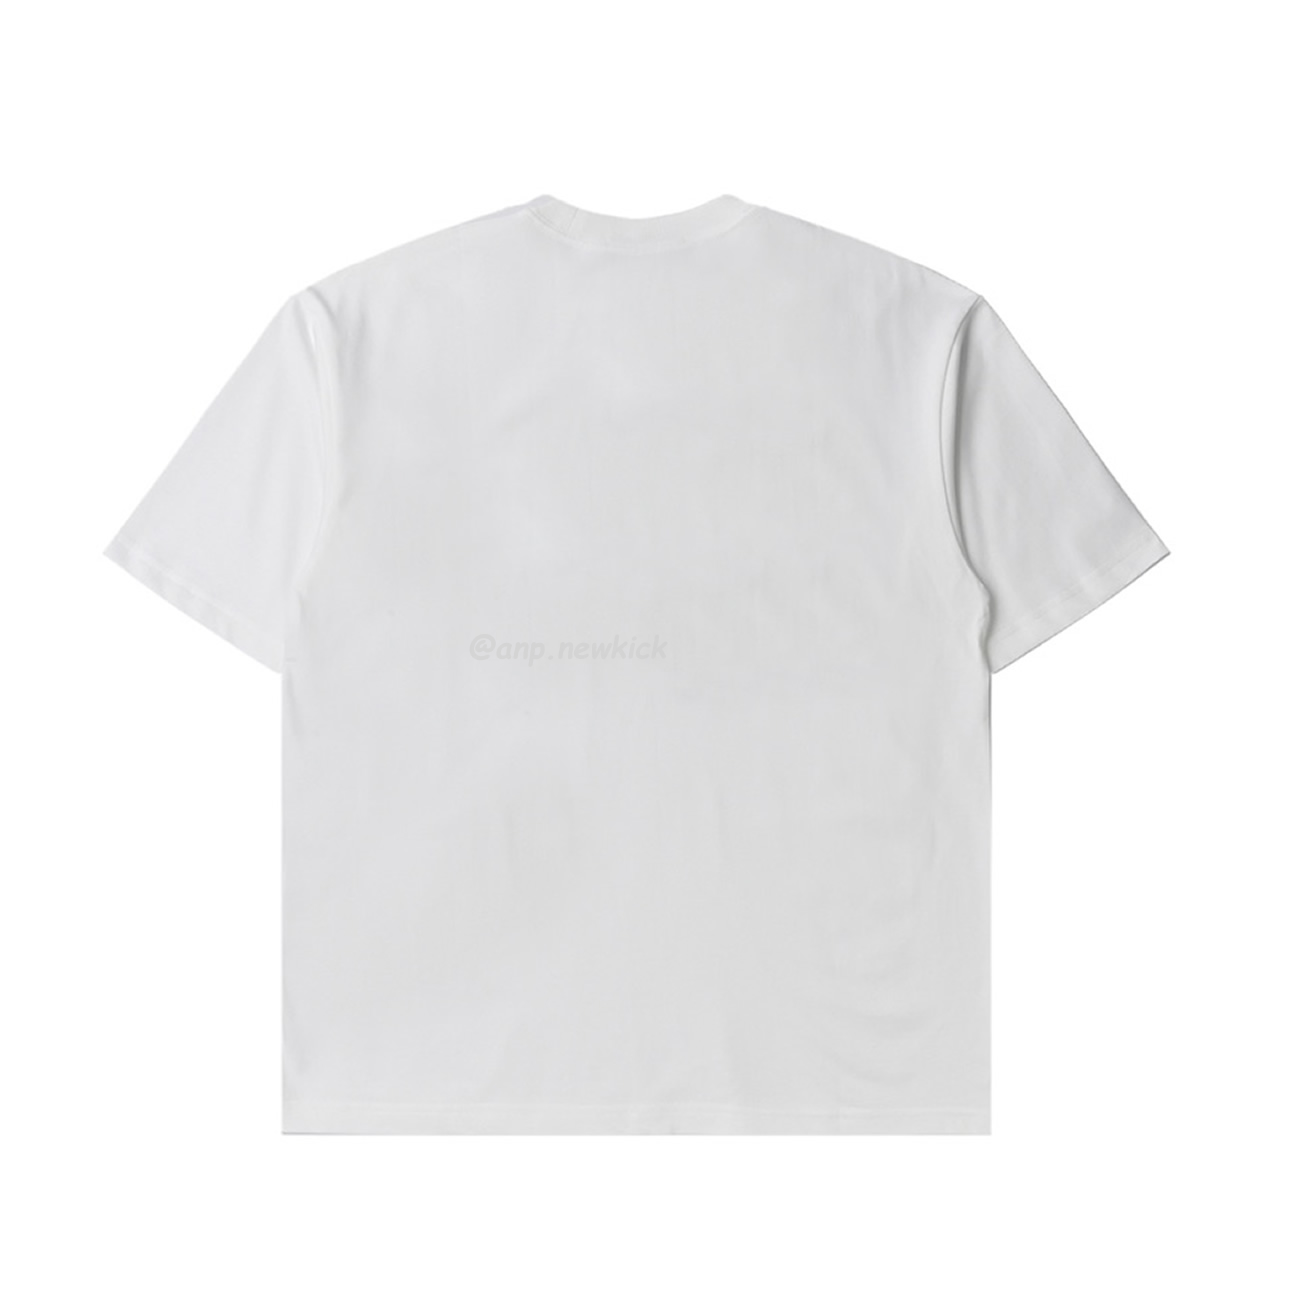 Balenciaga X Gucci Co Branded Double B Letter Printed Logo Printed Short Sleeved T Shirt (11) - newkick.org